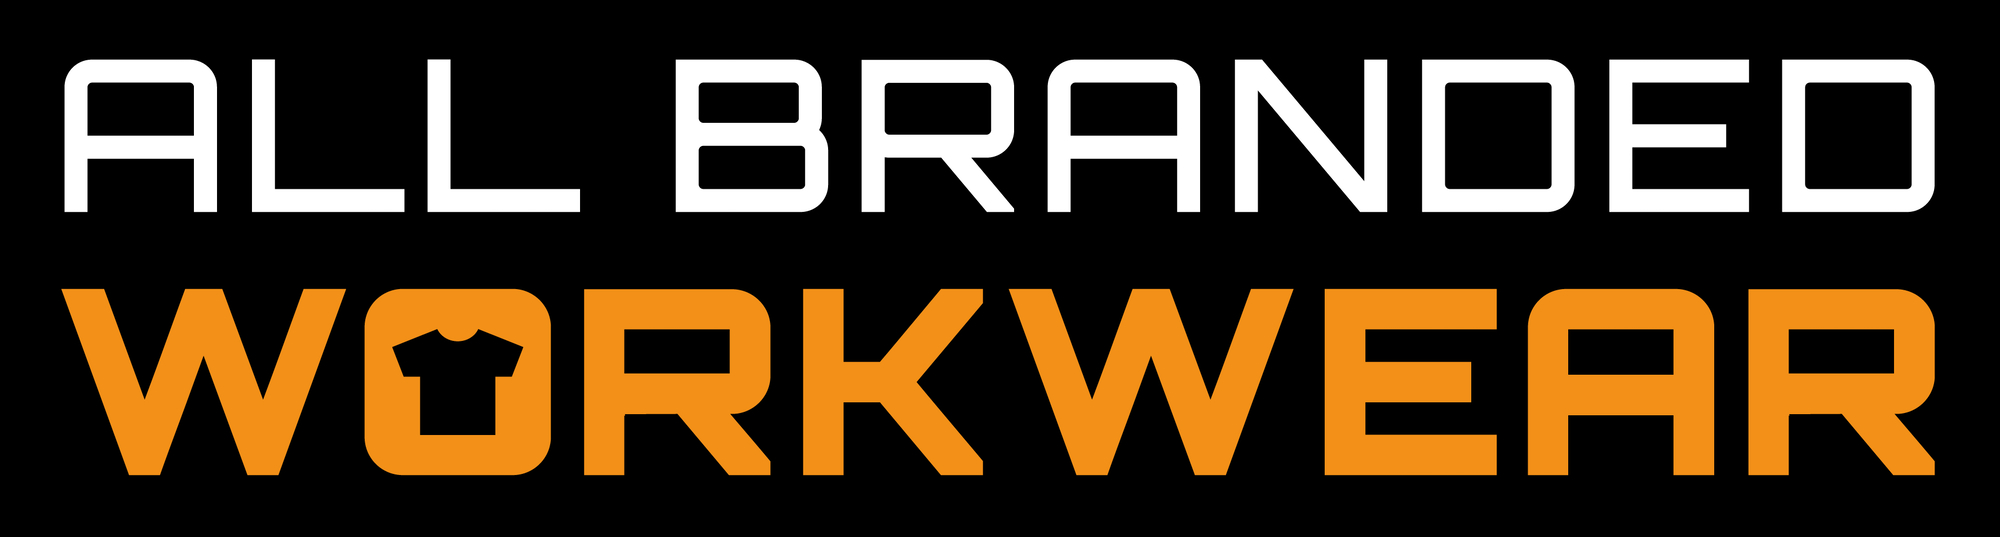 Embroidery Rotherham | Workwear Embroidery & Print - All Branded Workwear | All Branded Workwear